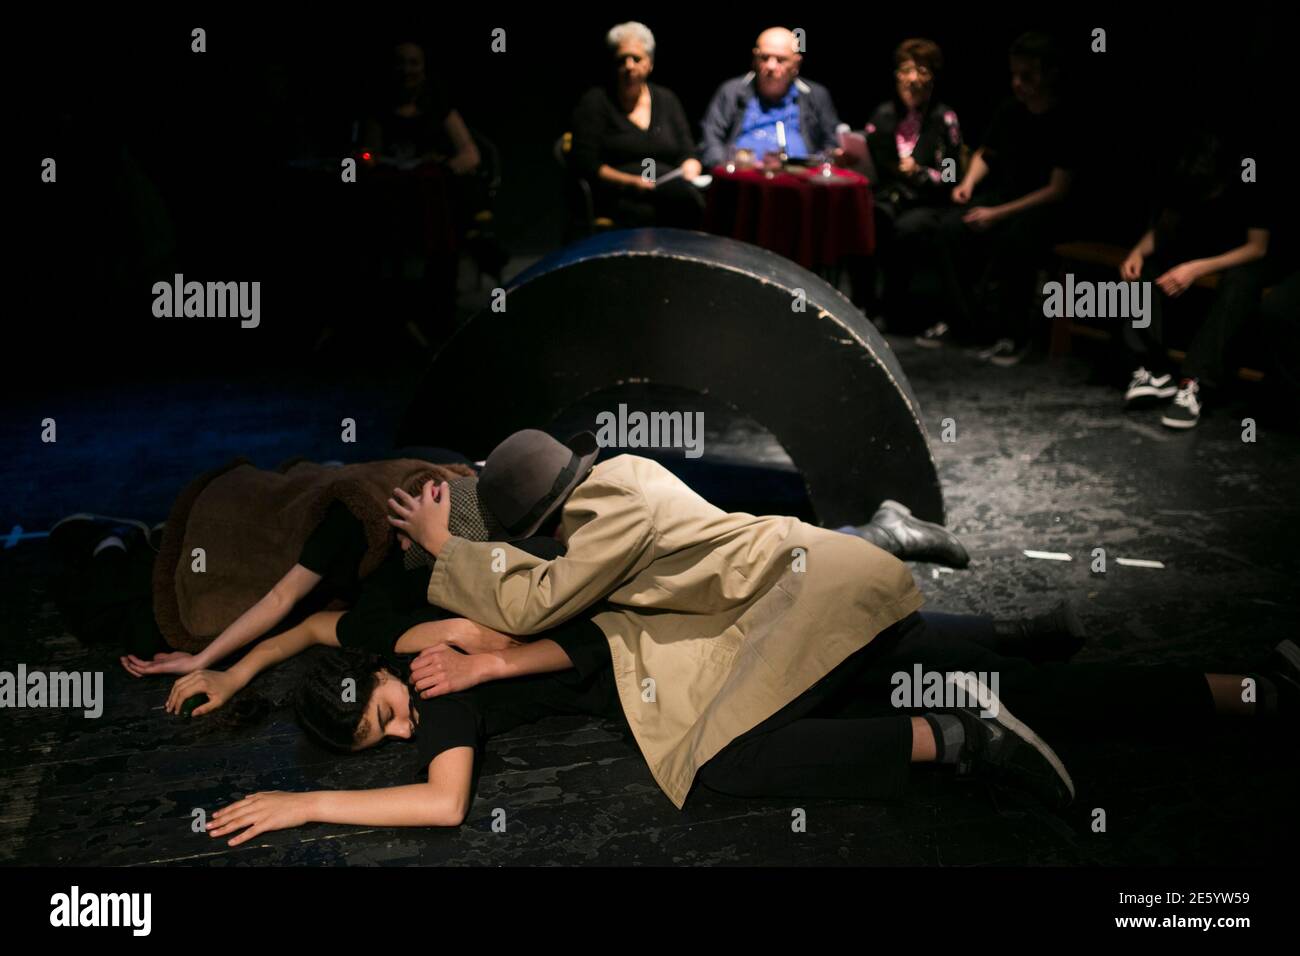 Israeli teenagers and Holocaust survivors (rear) perform during a dress rehearsal, part of an educational project, in Shoham near Tel Aviv March 23, 2014. Testimony Theater Project, established by Ezra and Irit Dagan in 2000, brings together teenagers, between the ages of 13 to 15, and Holocaust survivors, who share personal experiences that are adapted into a collaborative theater production in which they perform. The organization has also worked on similar projects in the United States and Germany. Israel on April 28, 2014, commemorates the six million Jews killed by the Nazis in the Holocau Stock Photo